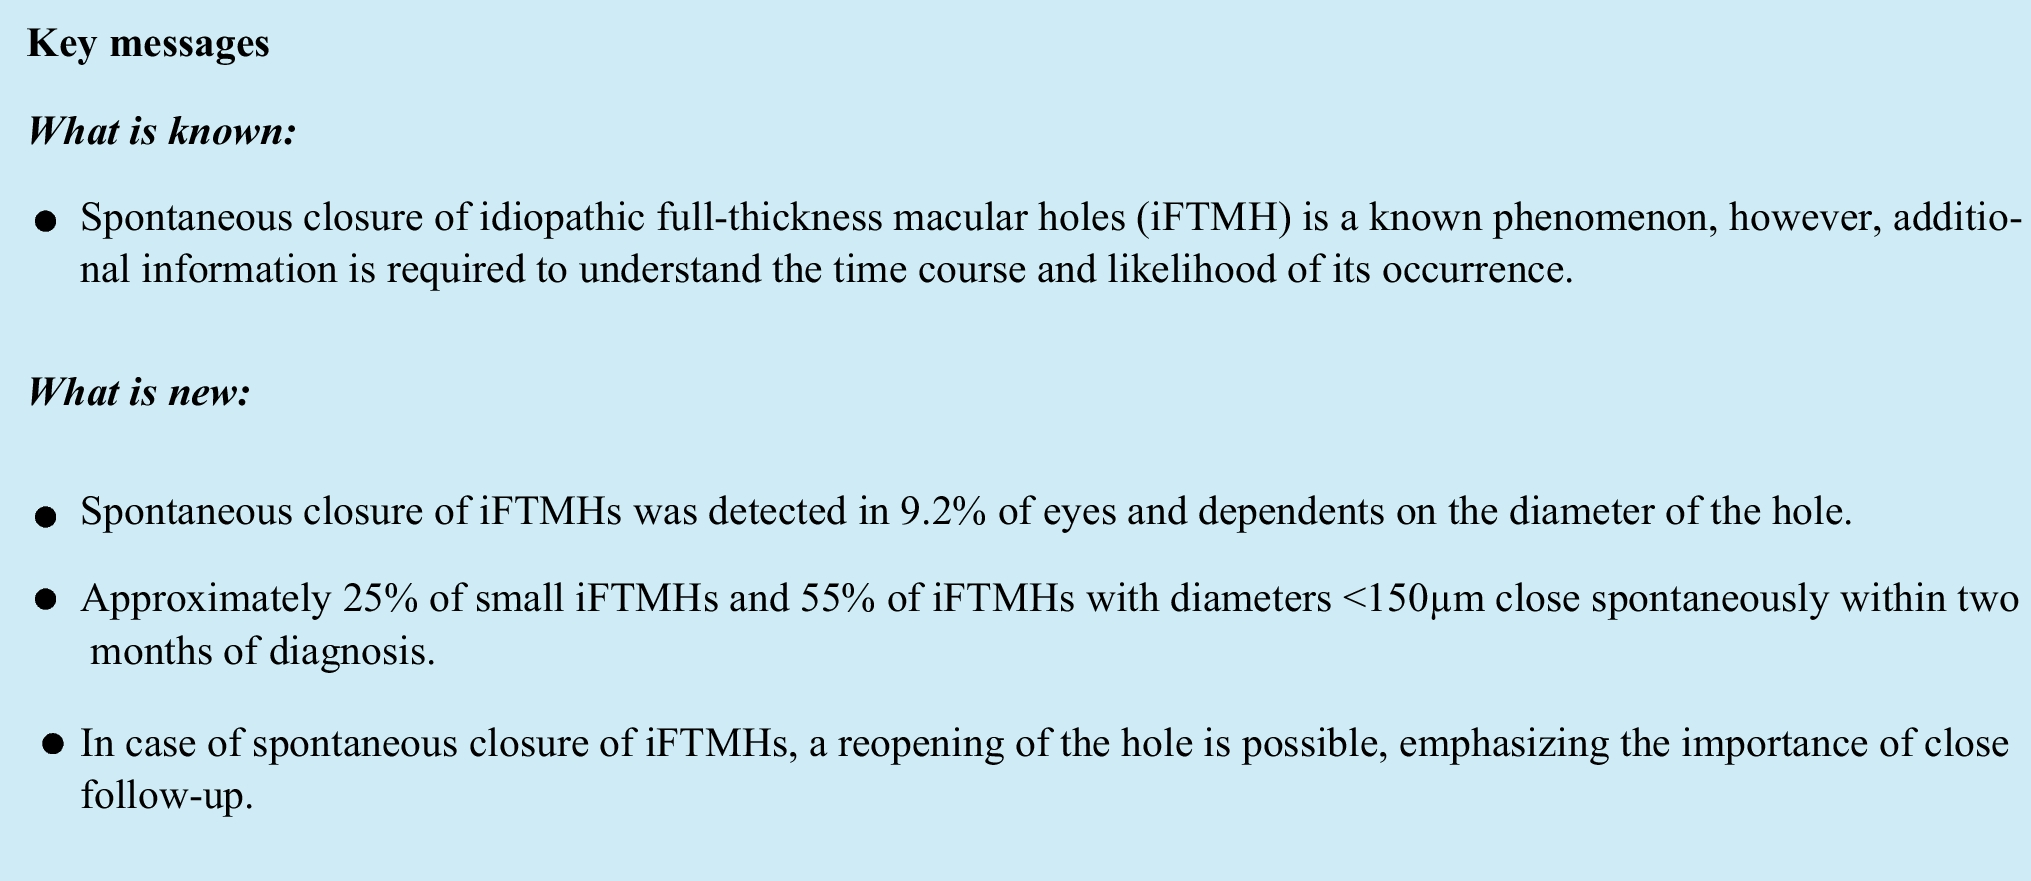 The time course of spontaneous closure of idiopathic full-thickness macular holes